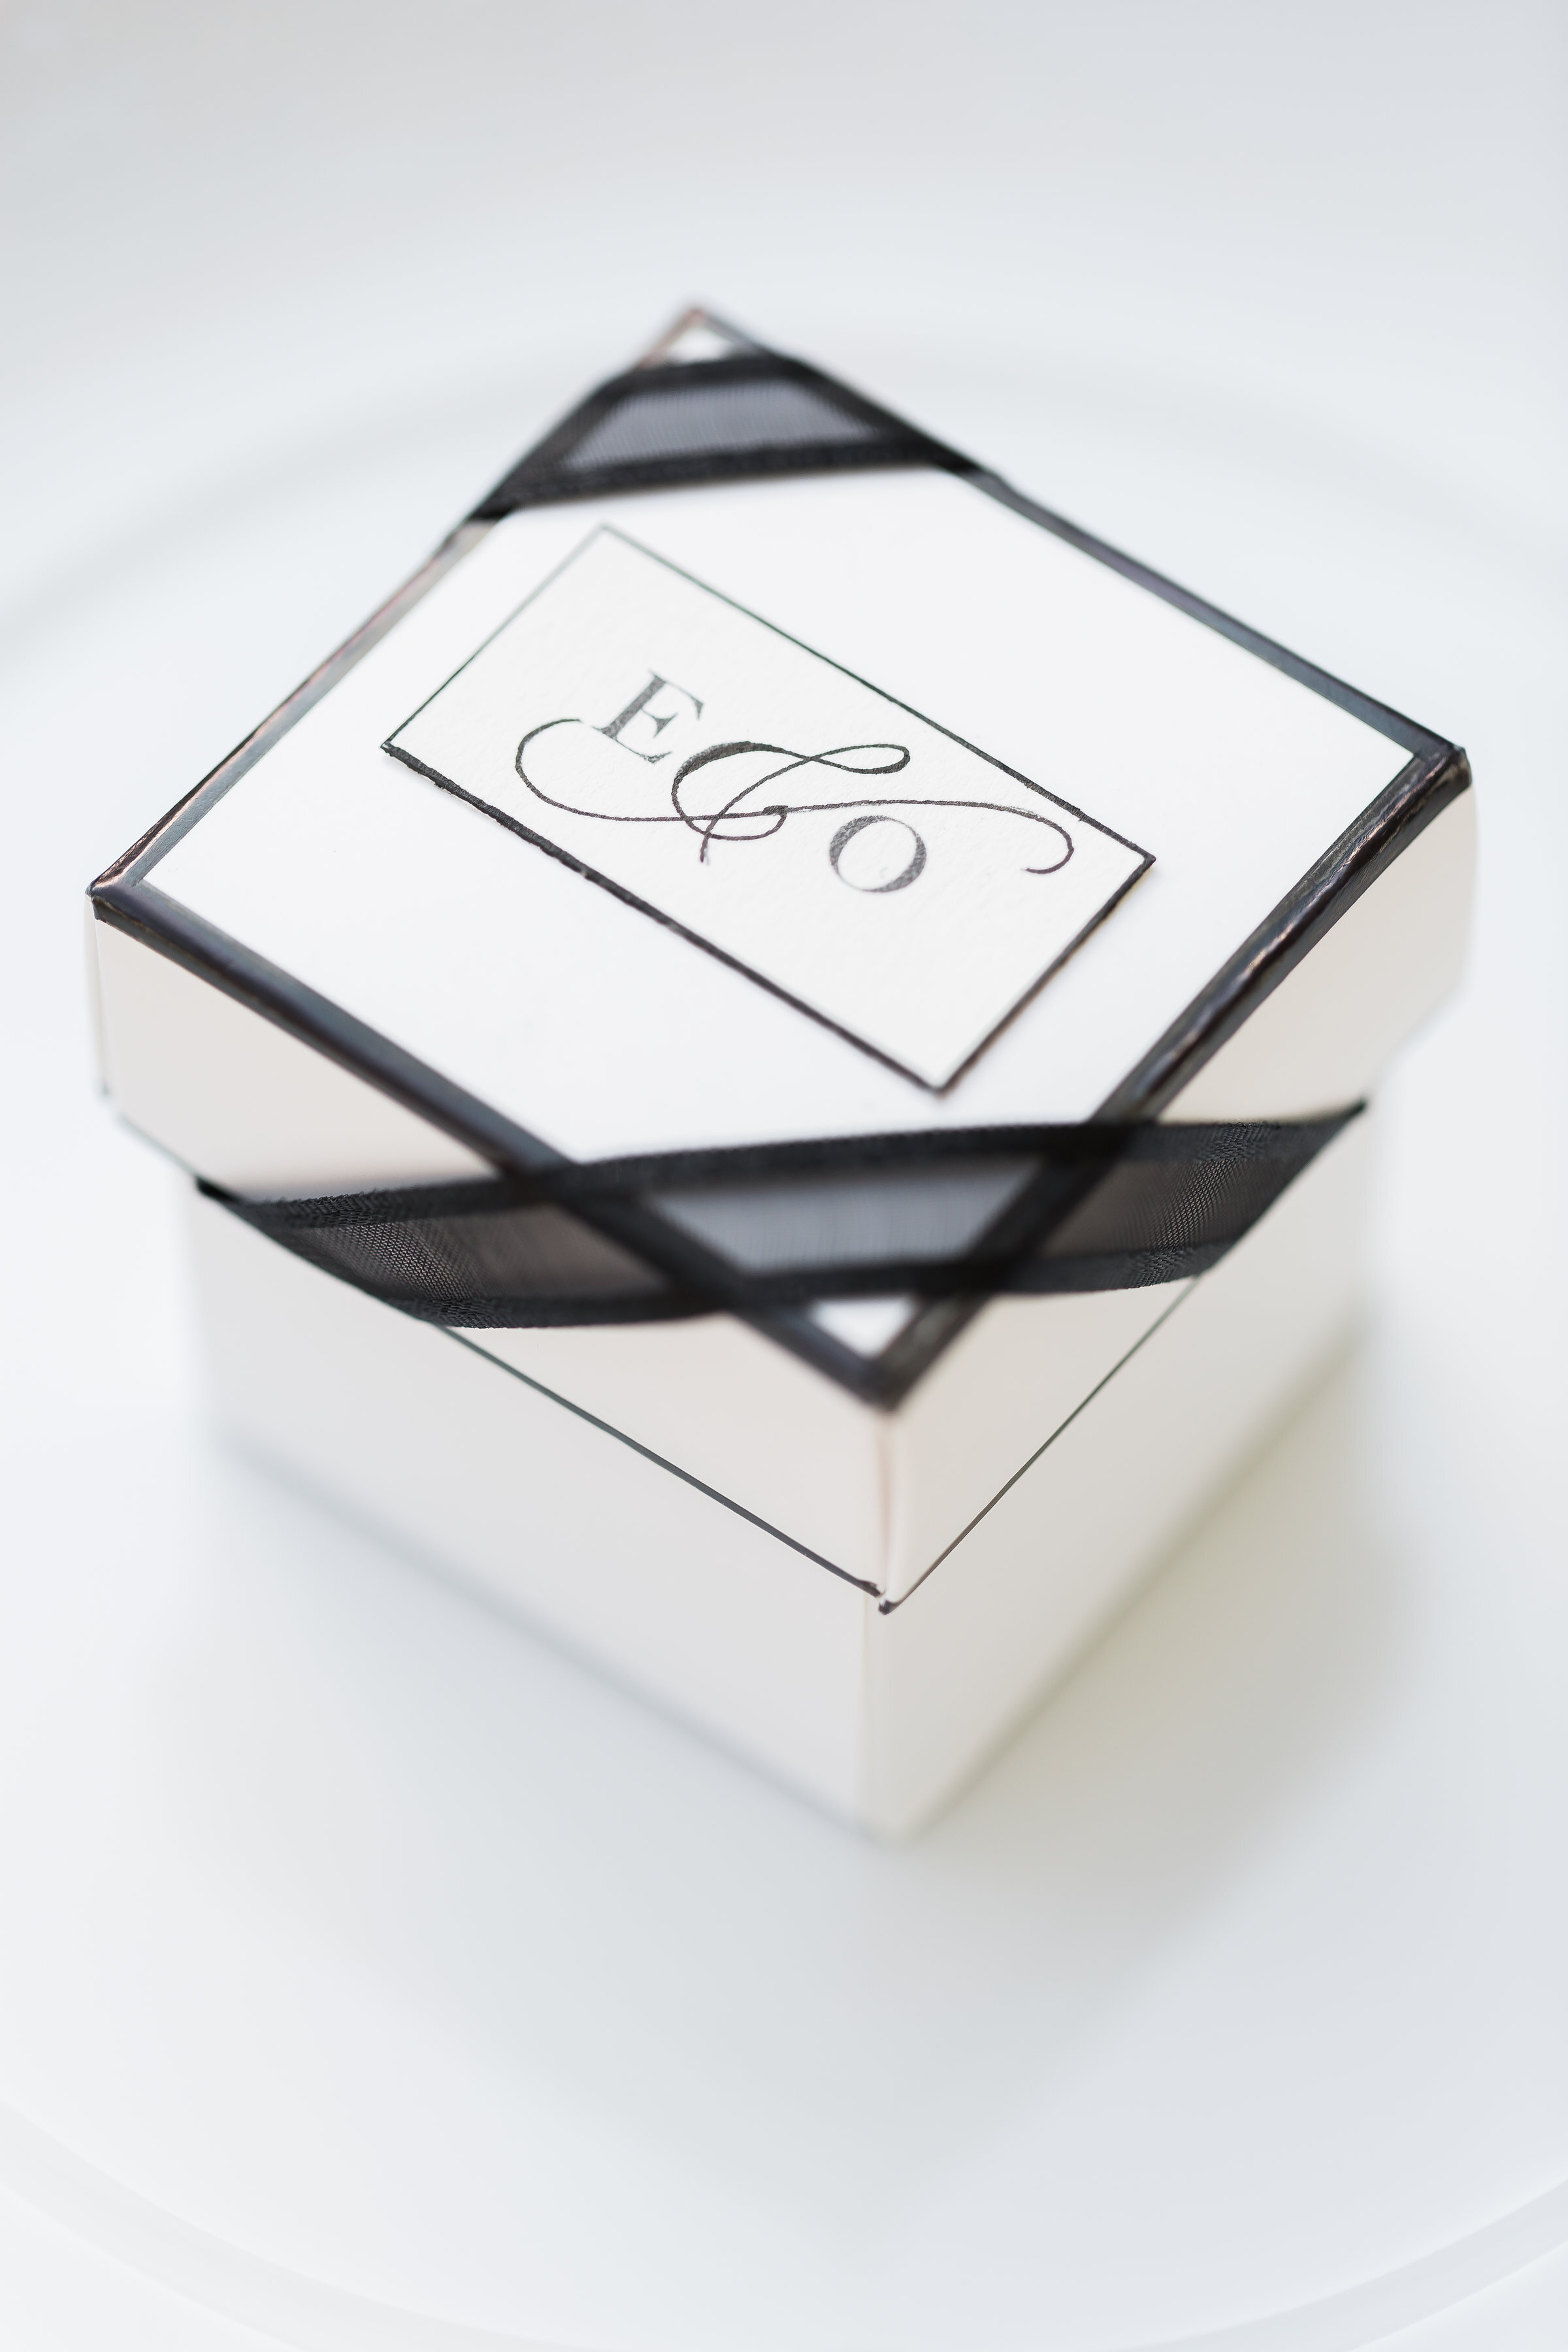 pacific-engagements-dumbarton-house-wedding-guest-favor-boxes-with-calligraphy-bespoke-strokes-calligraphy-and-engraving-fine-art-wedding